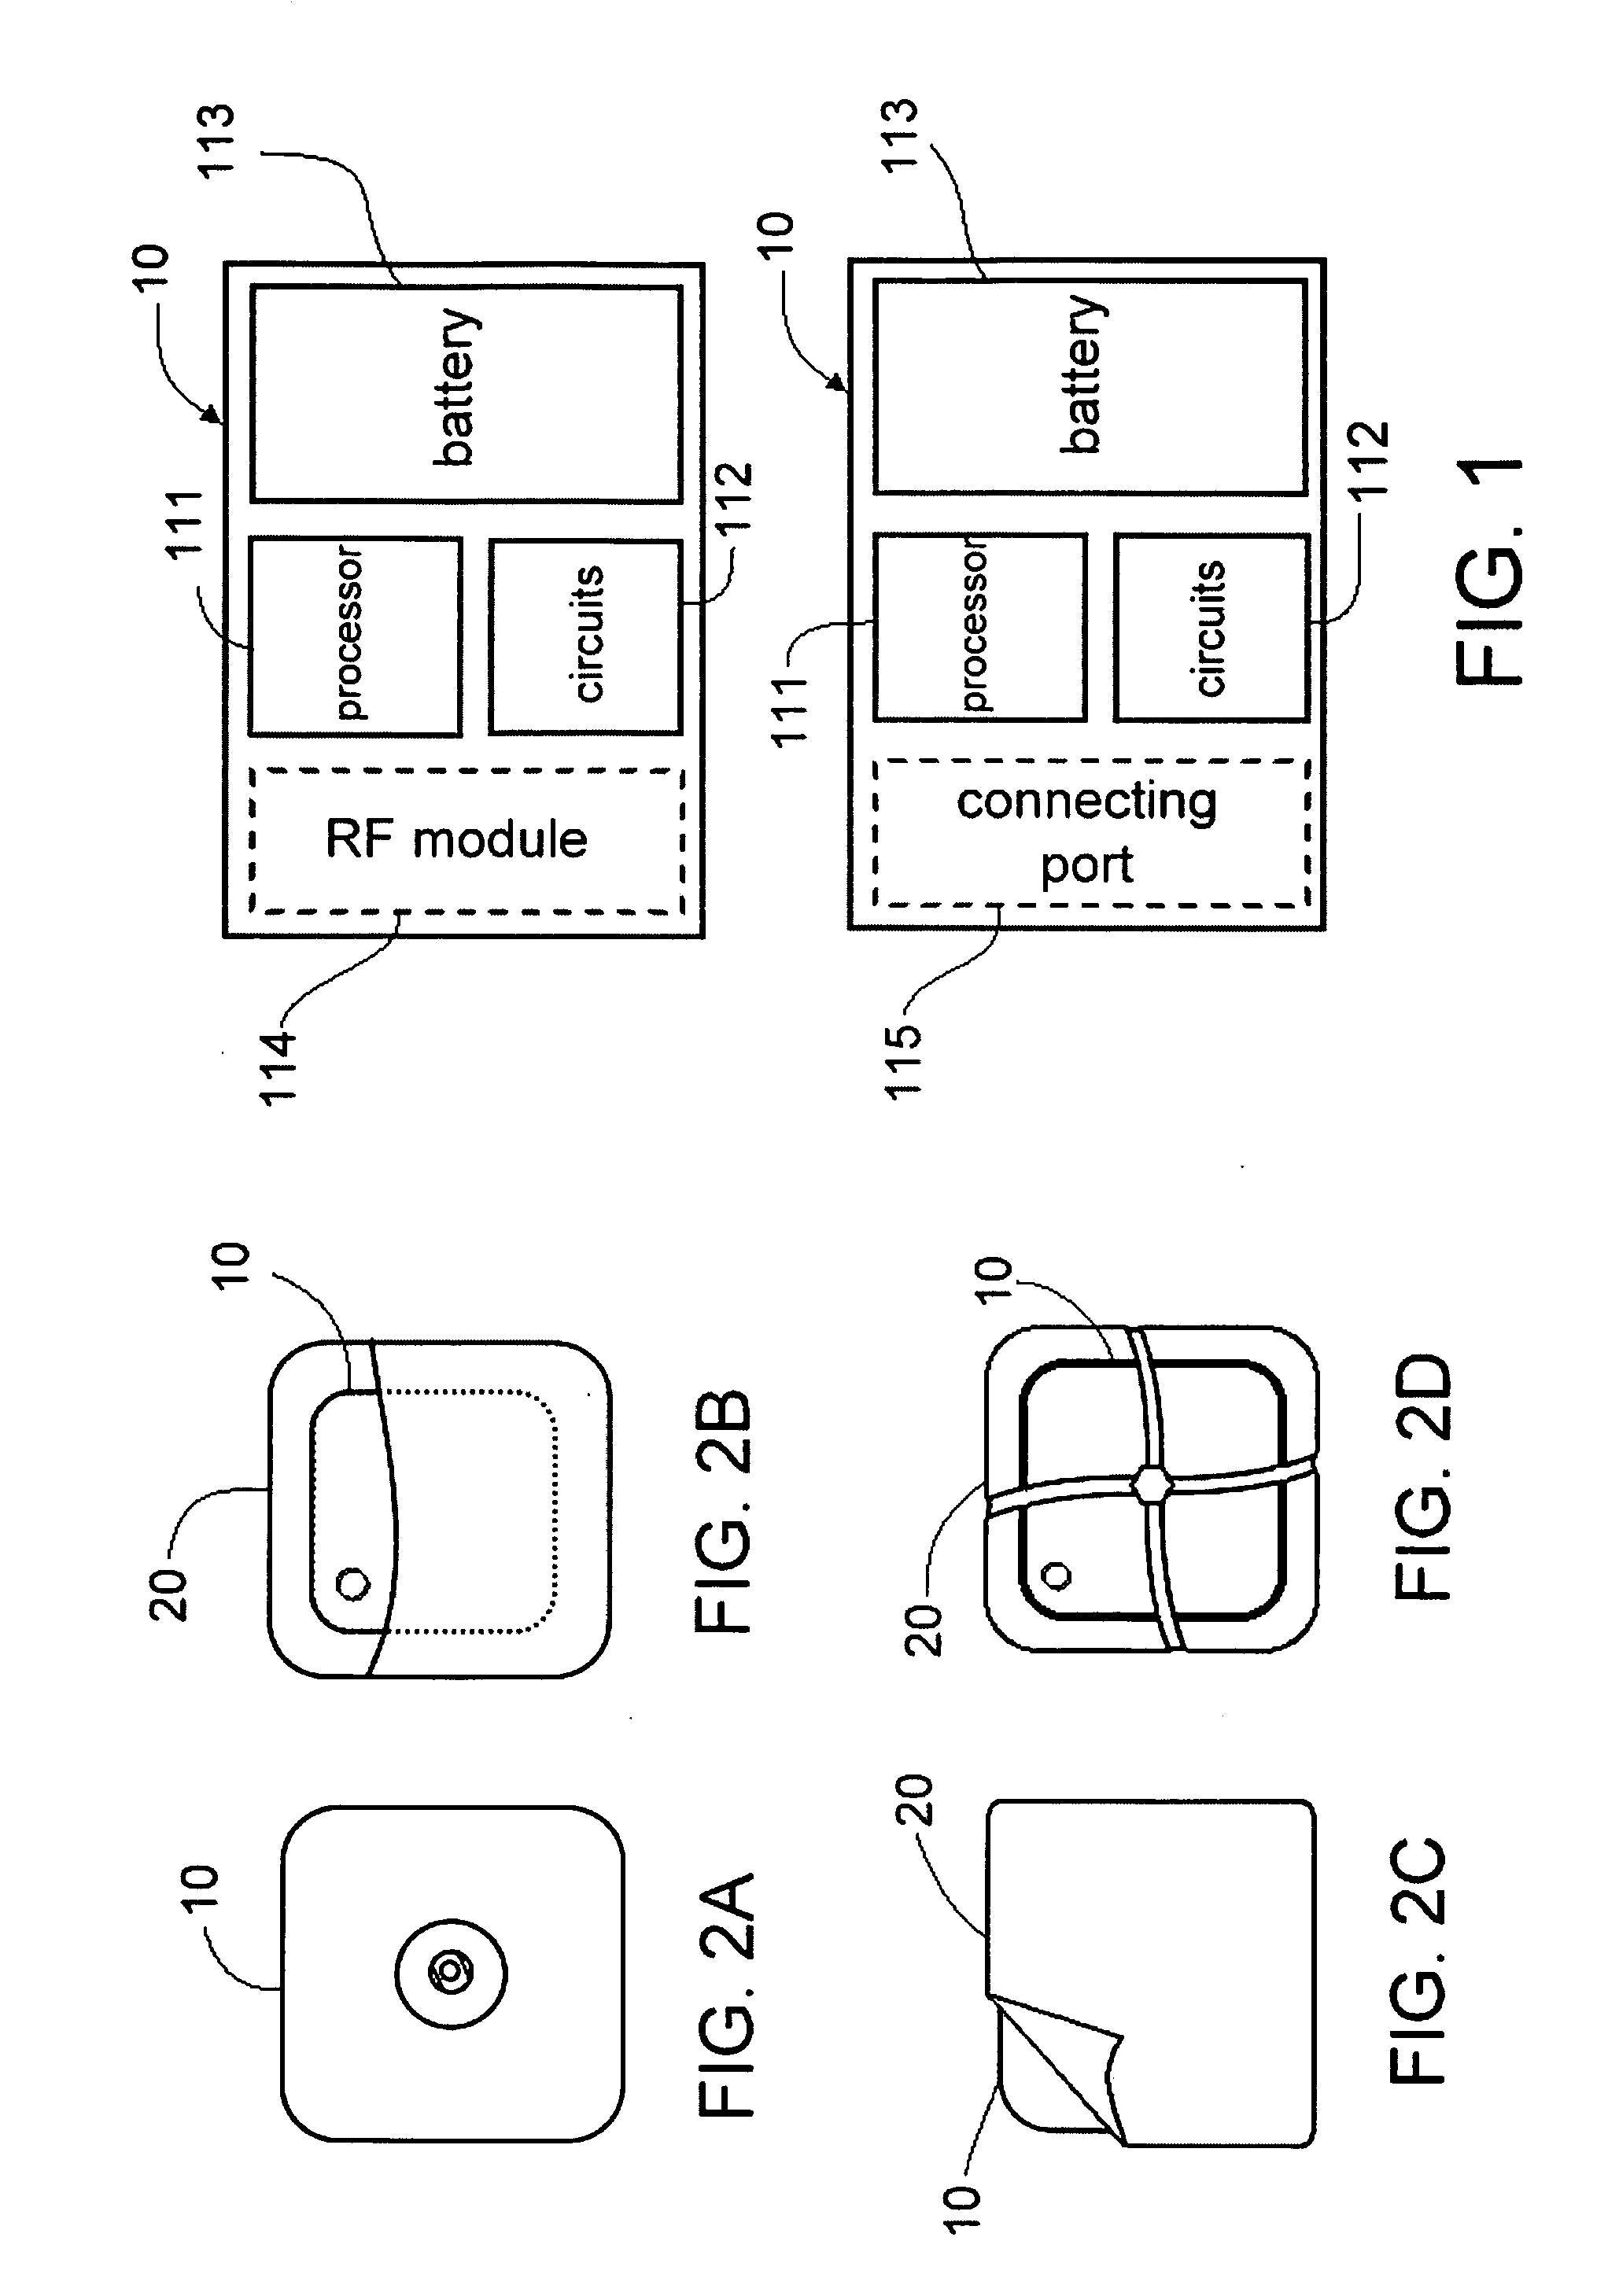 Patch-type physiological monitoring apparatus, system and network